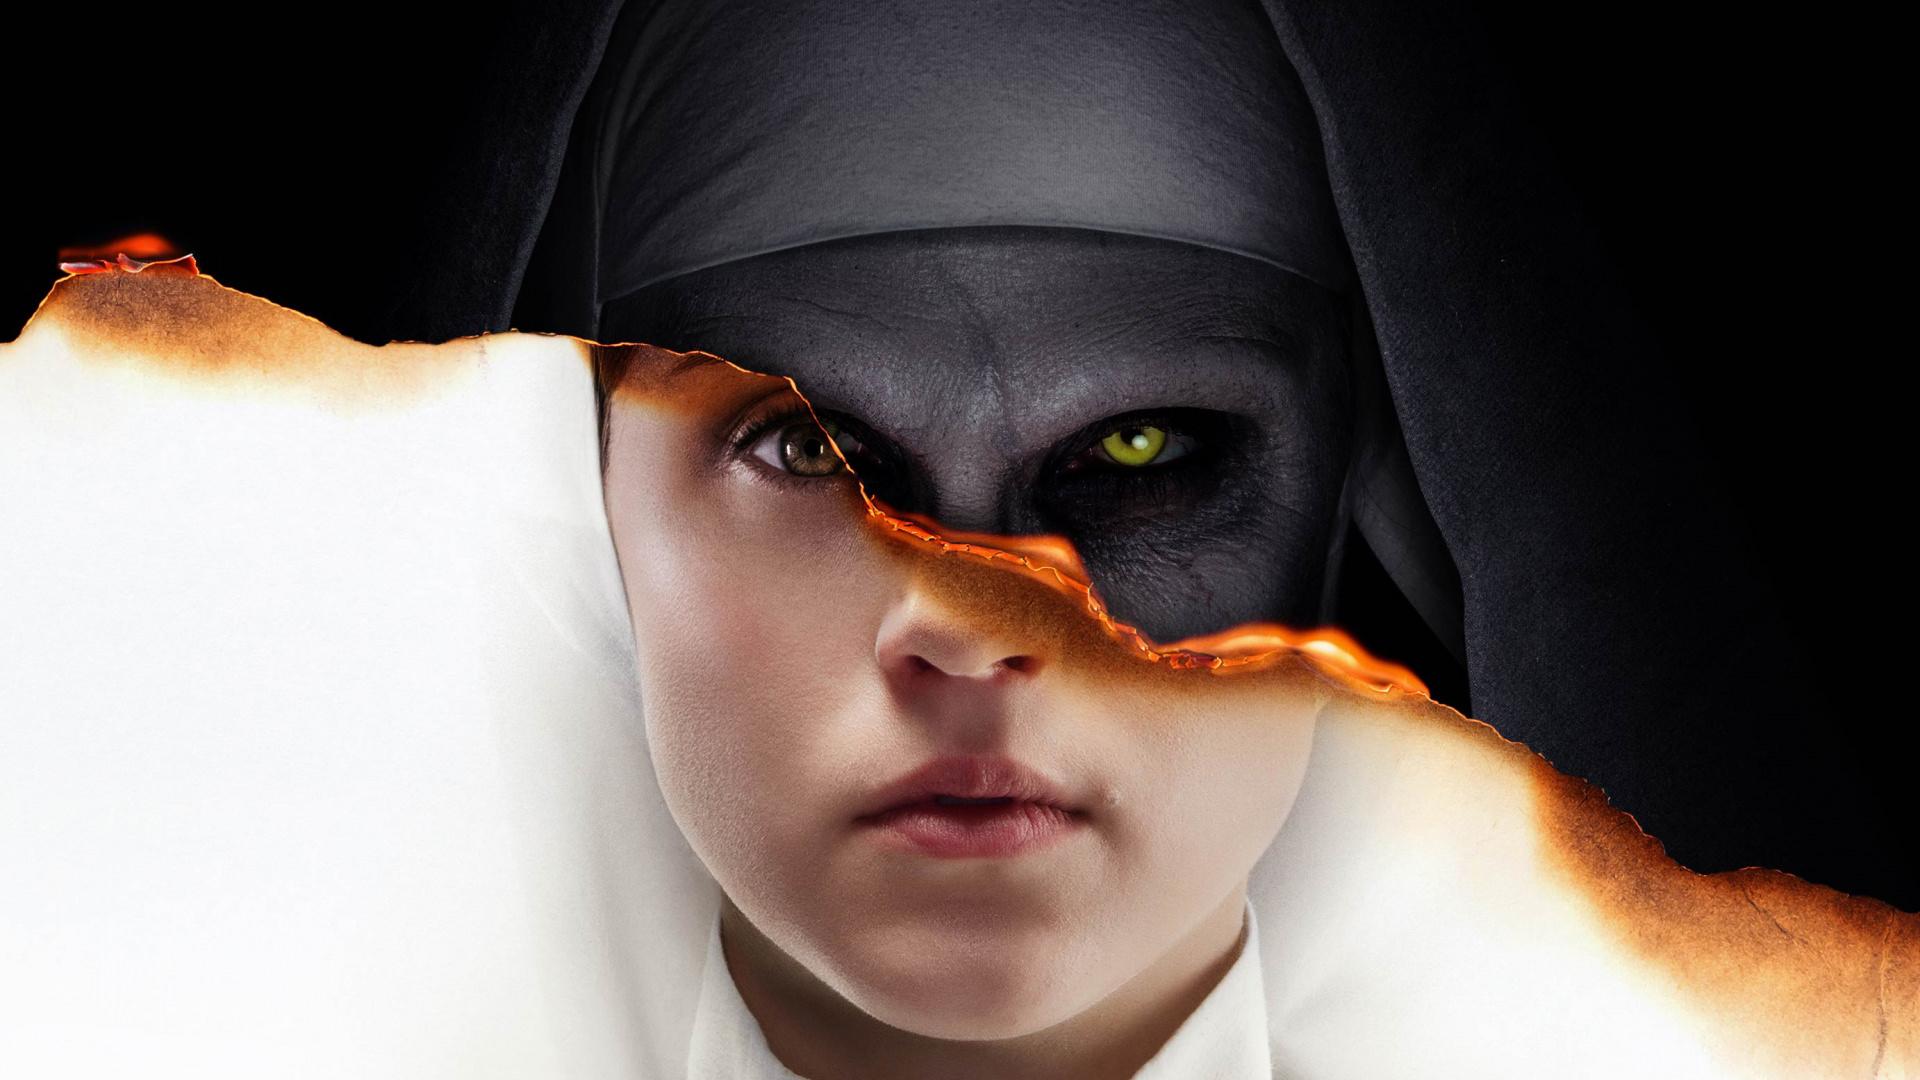 Download 1920x1080 wallpaper the nun, movie, poster, full HD